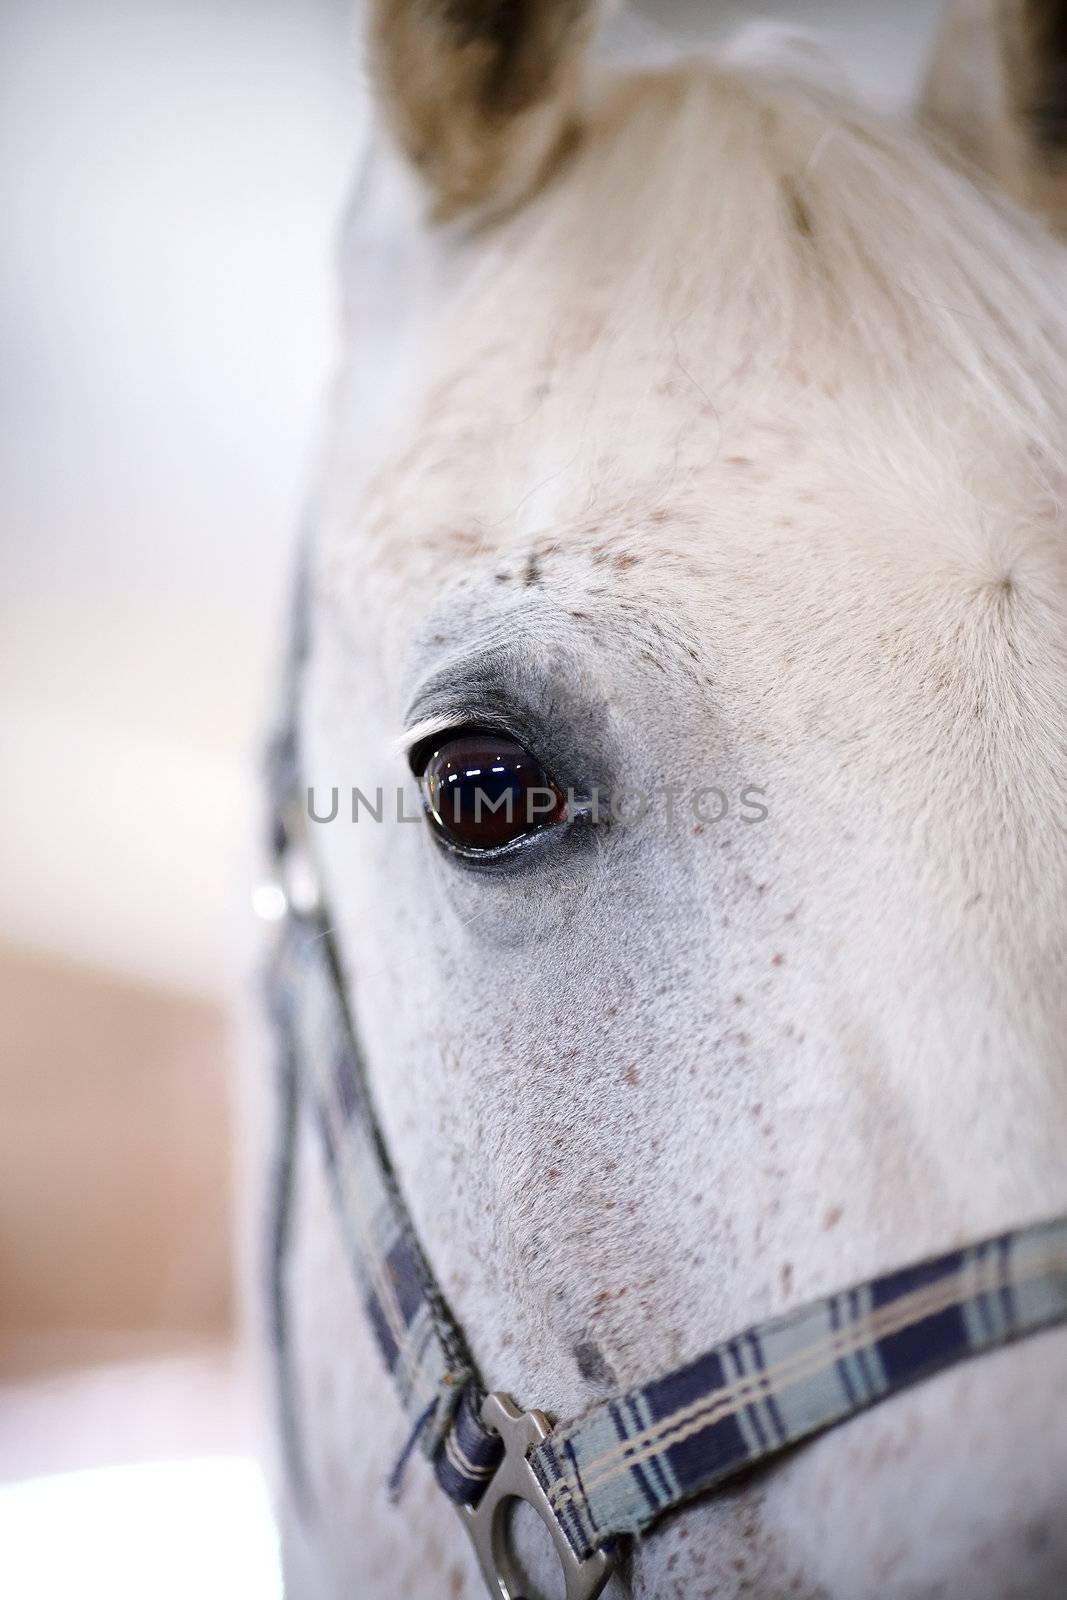 Eye of a white horse. Muzzle of a horse. Look of a horse. Muzzle of a white stallion.